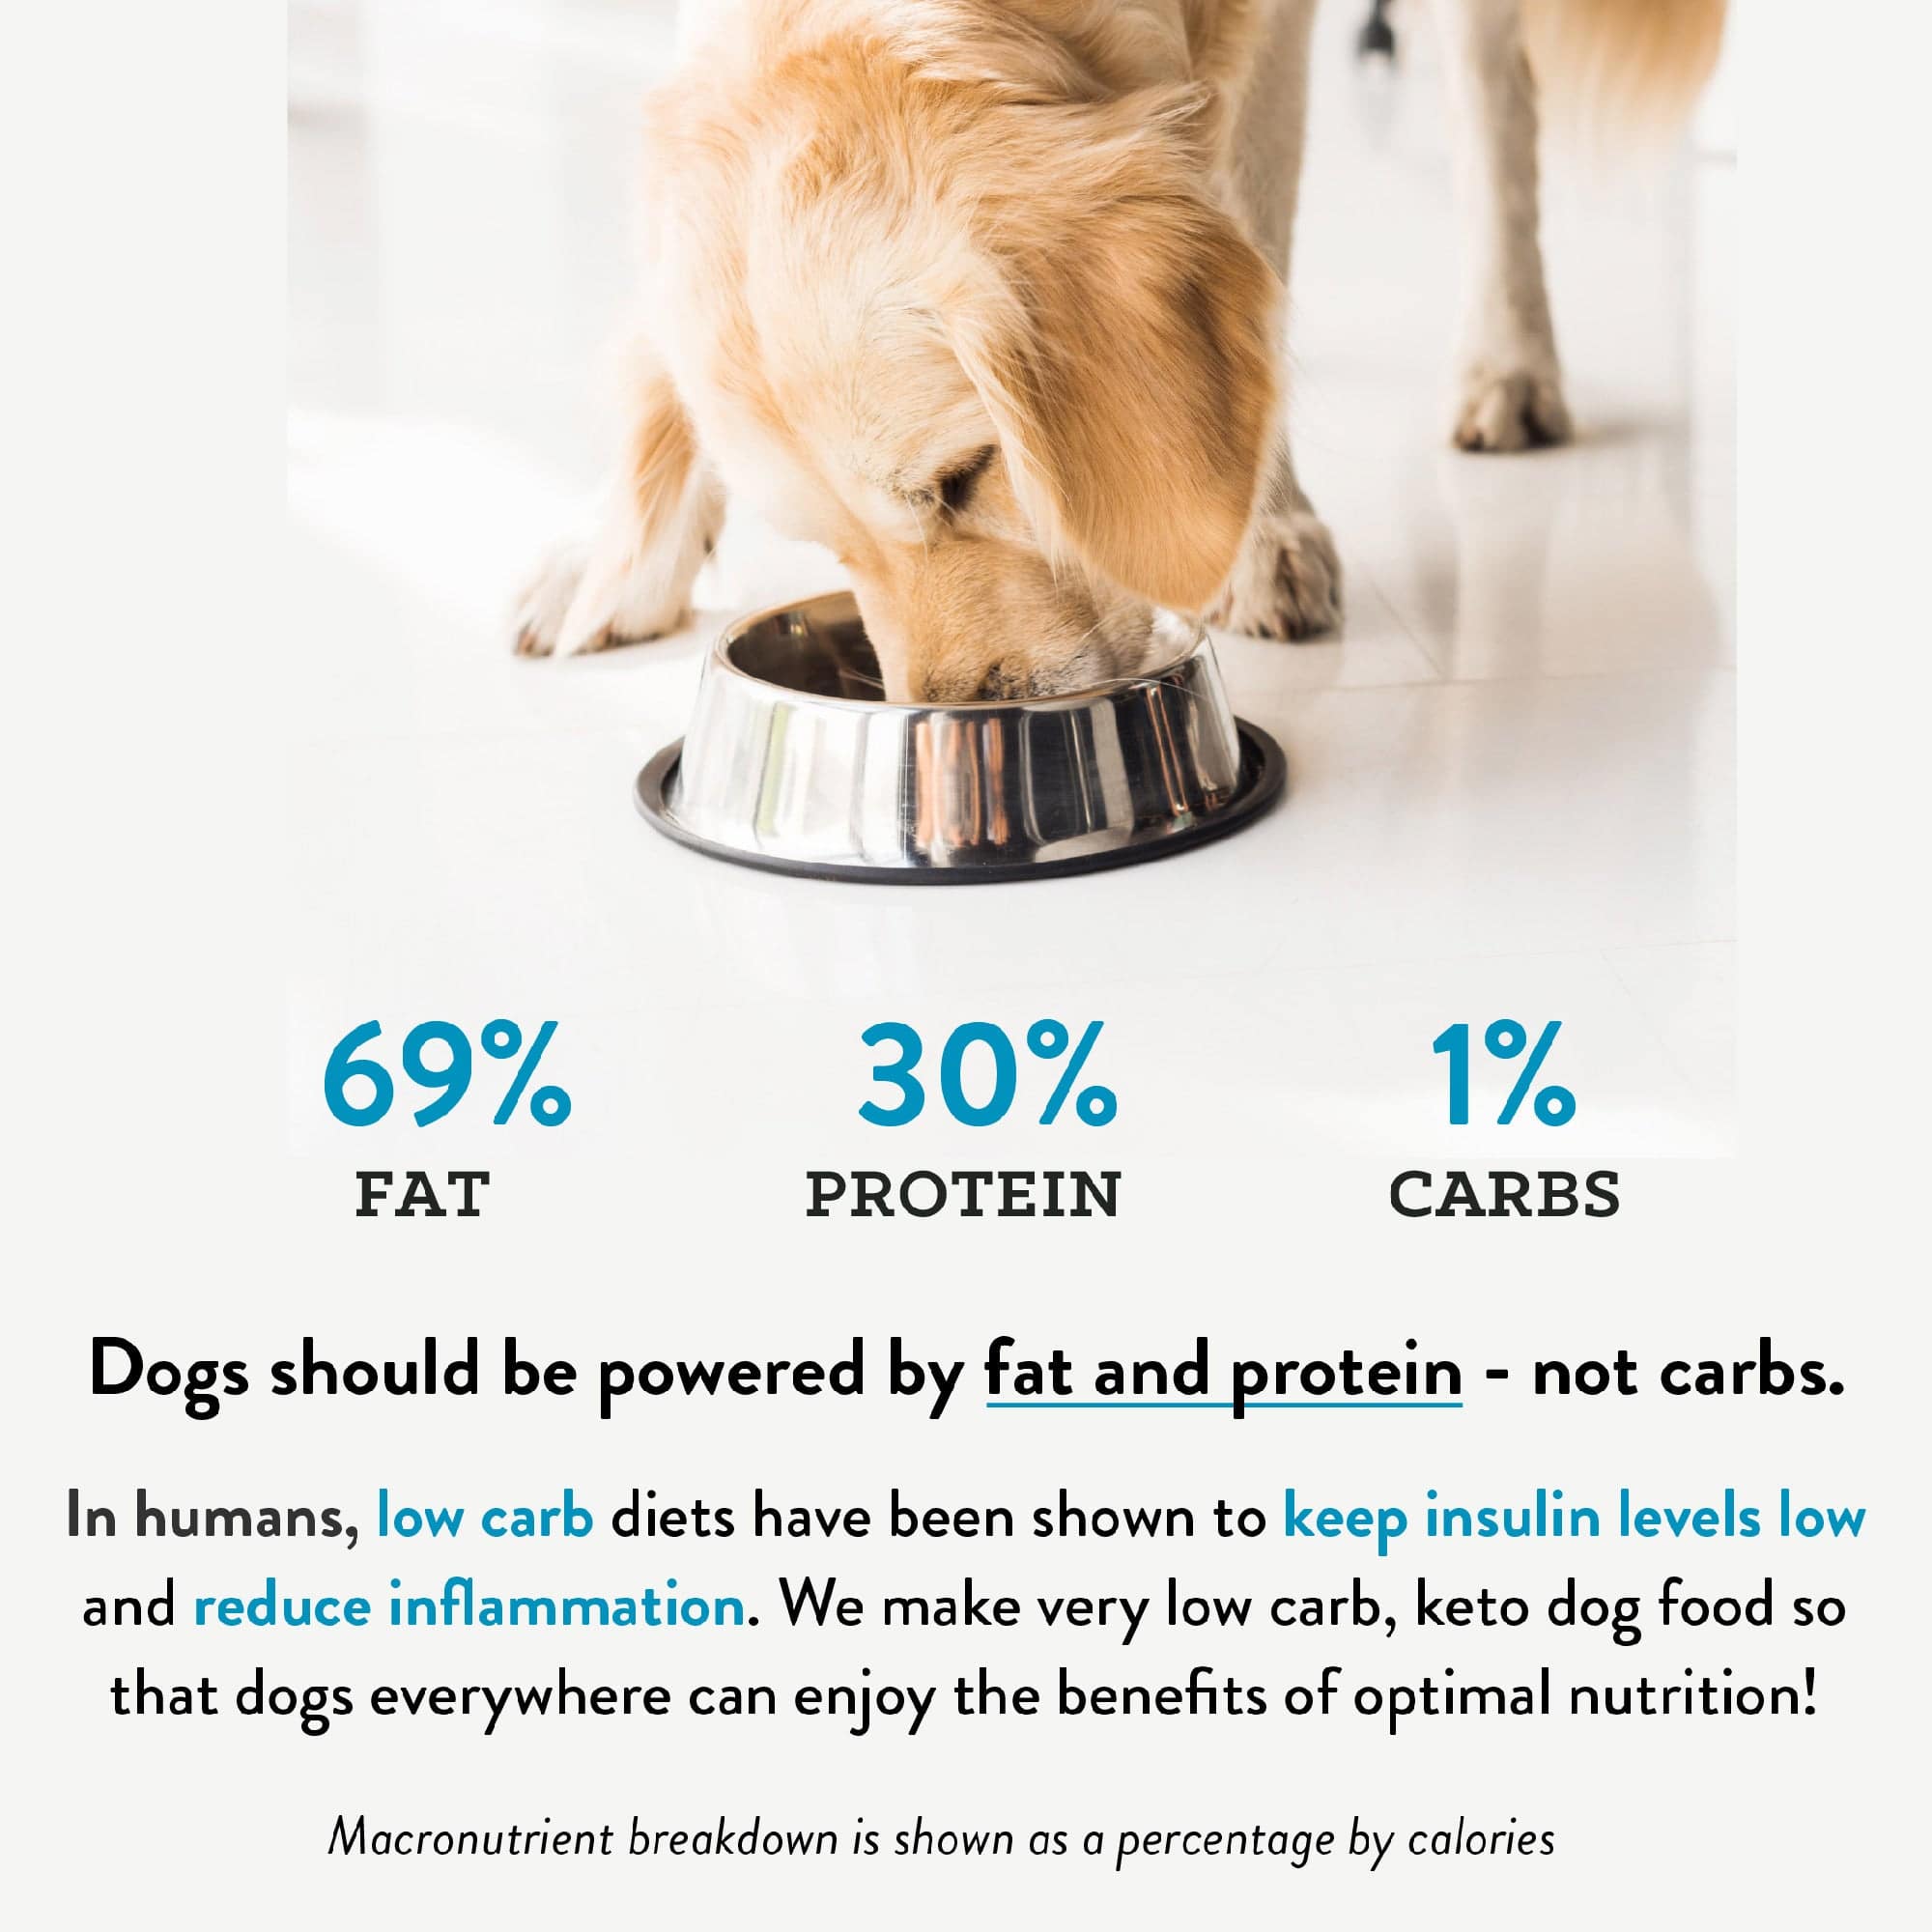 Golden retriever eating from a bowl with text on macronutrient breakdown advocating high fat and protein diet for dogs.